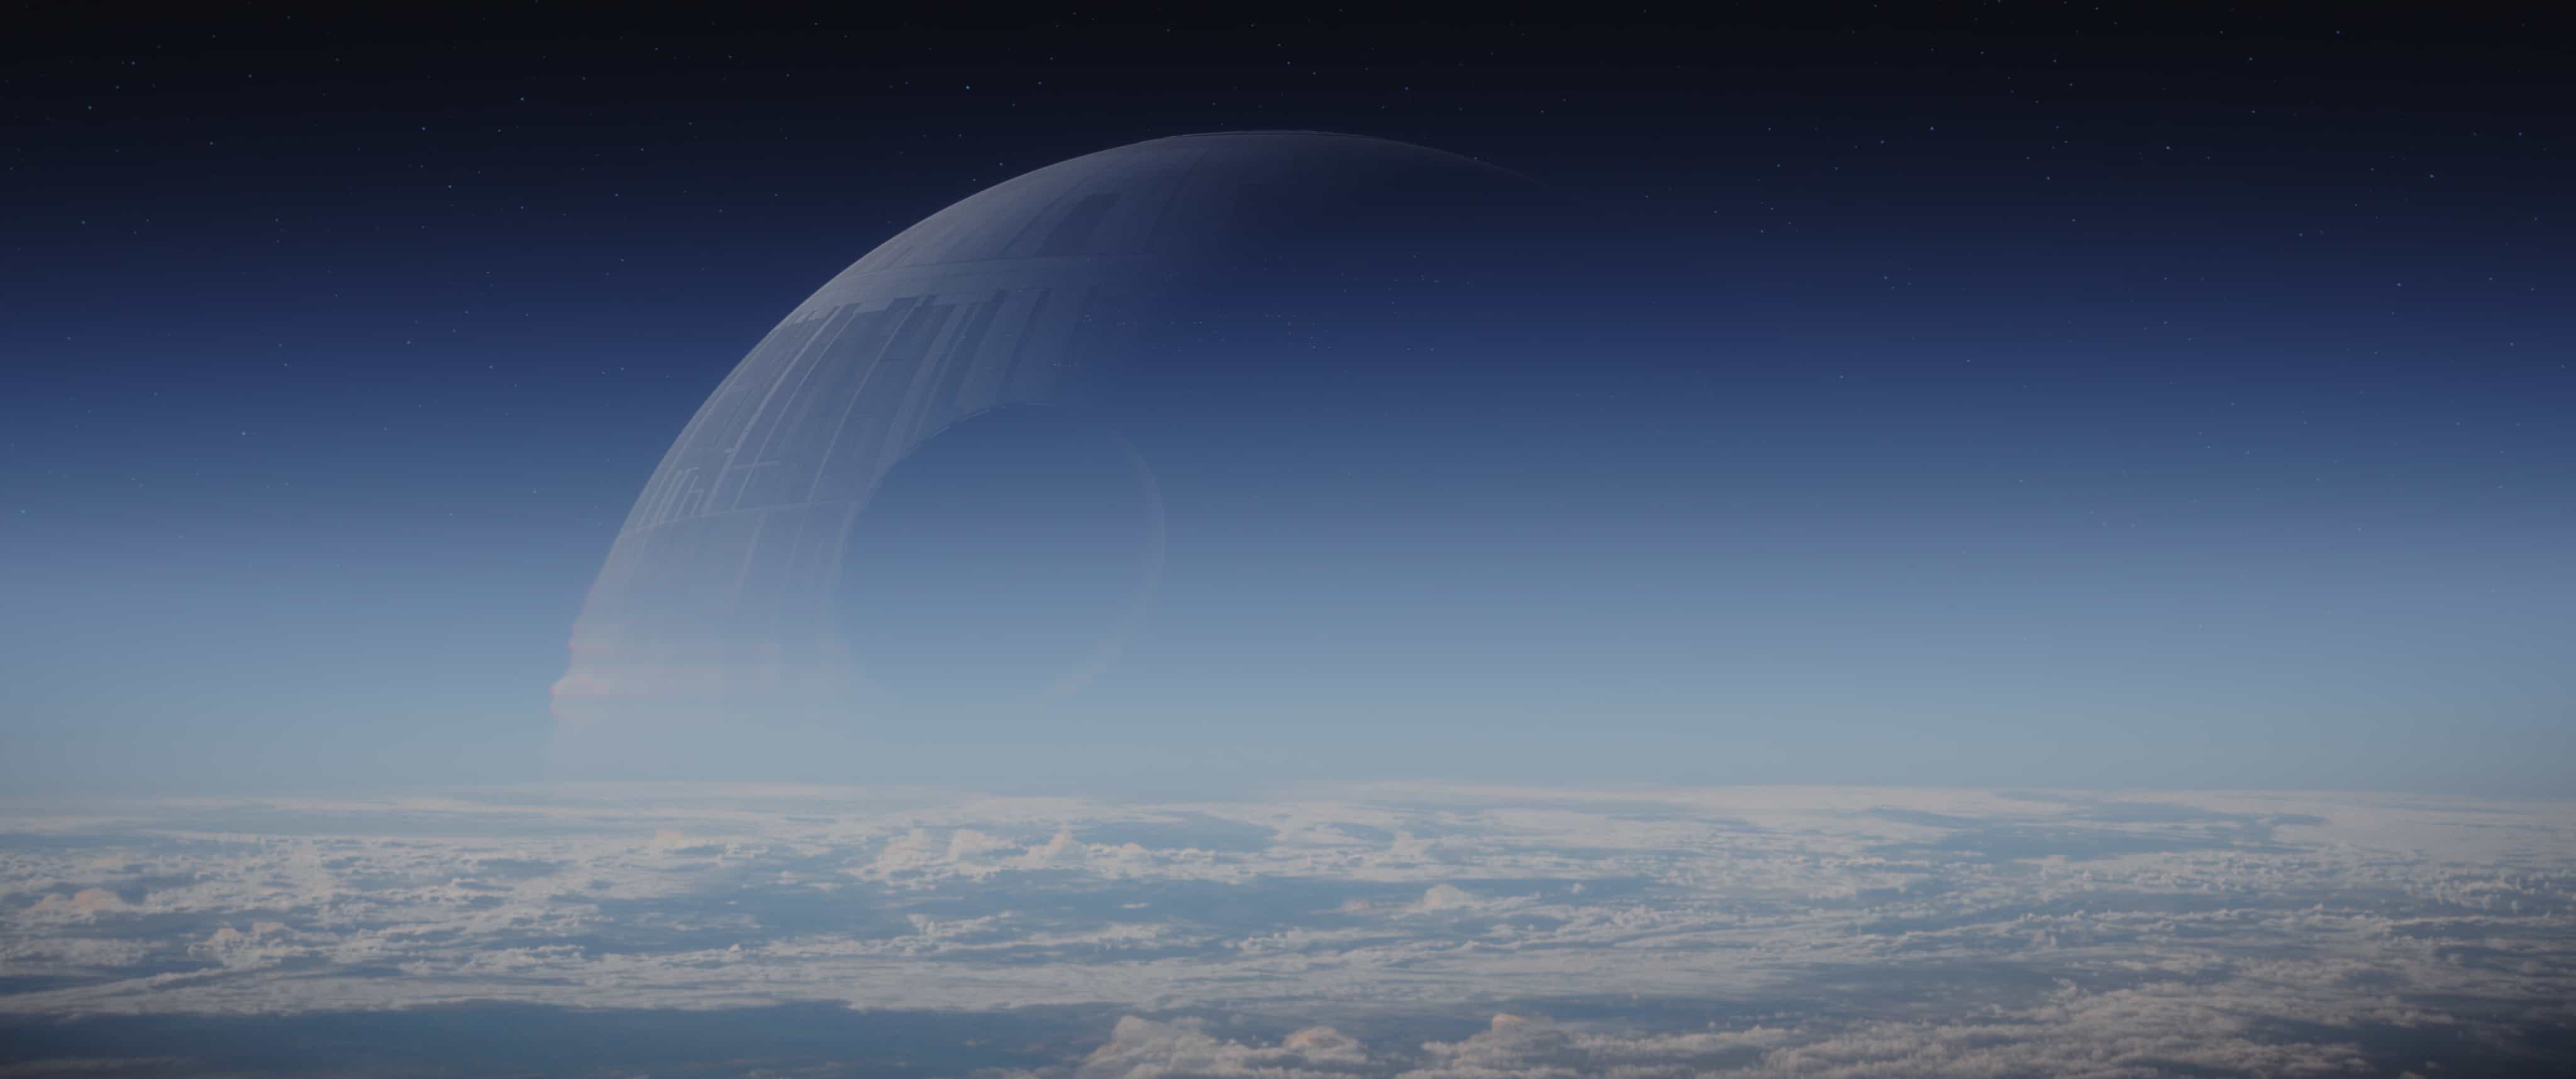 Rogue One: A Star Wars Story Death Star Photo credit: Lucasfilm/ILM ©2016 Lucasfilm Ltd. All Rights Reserved.